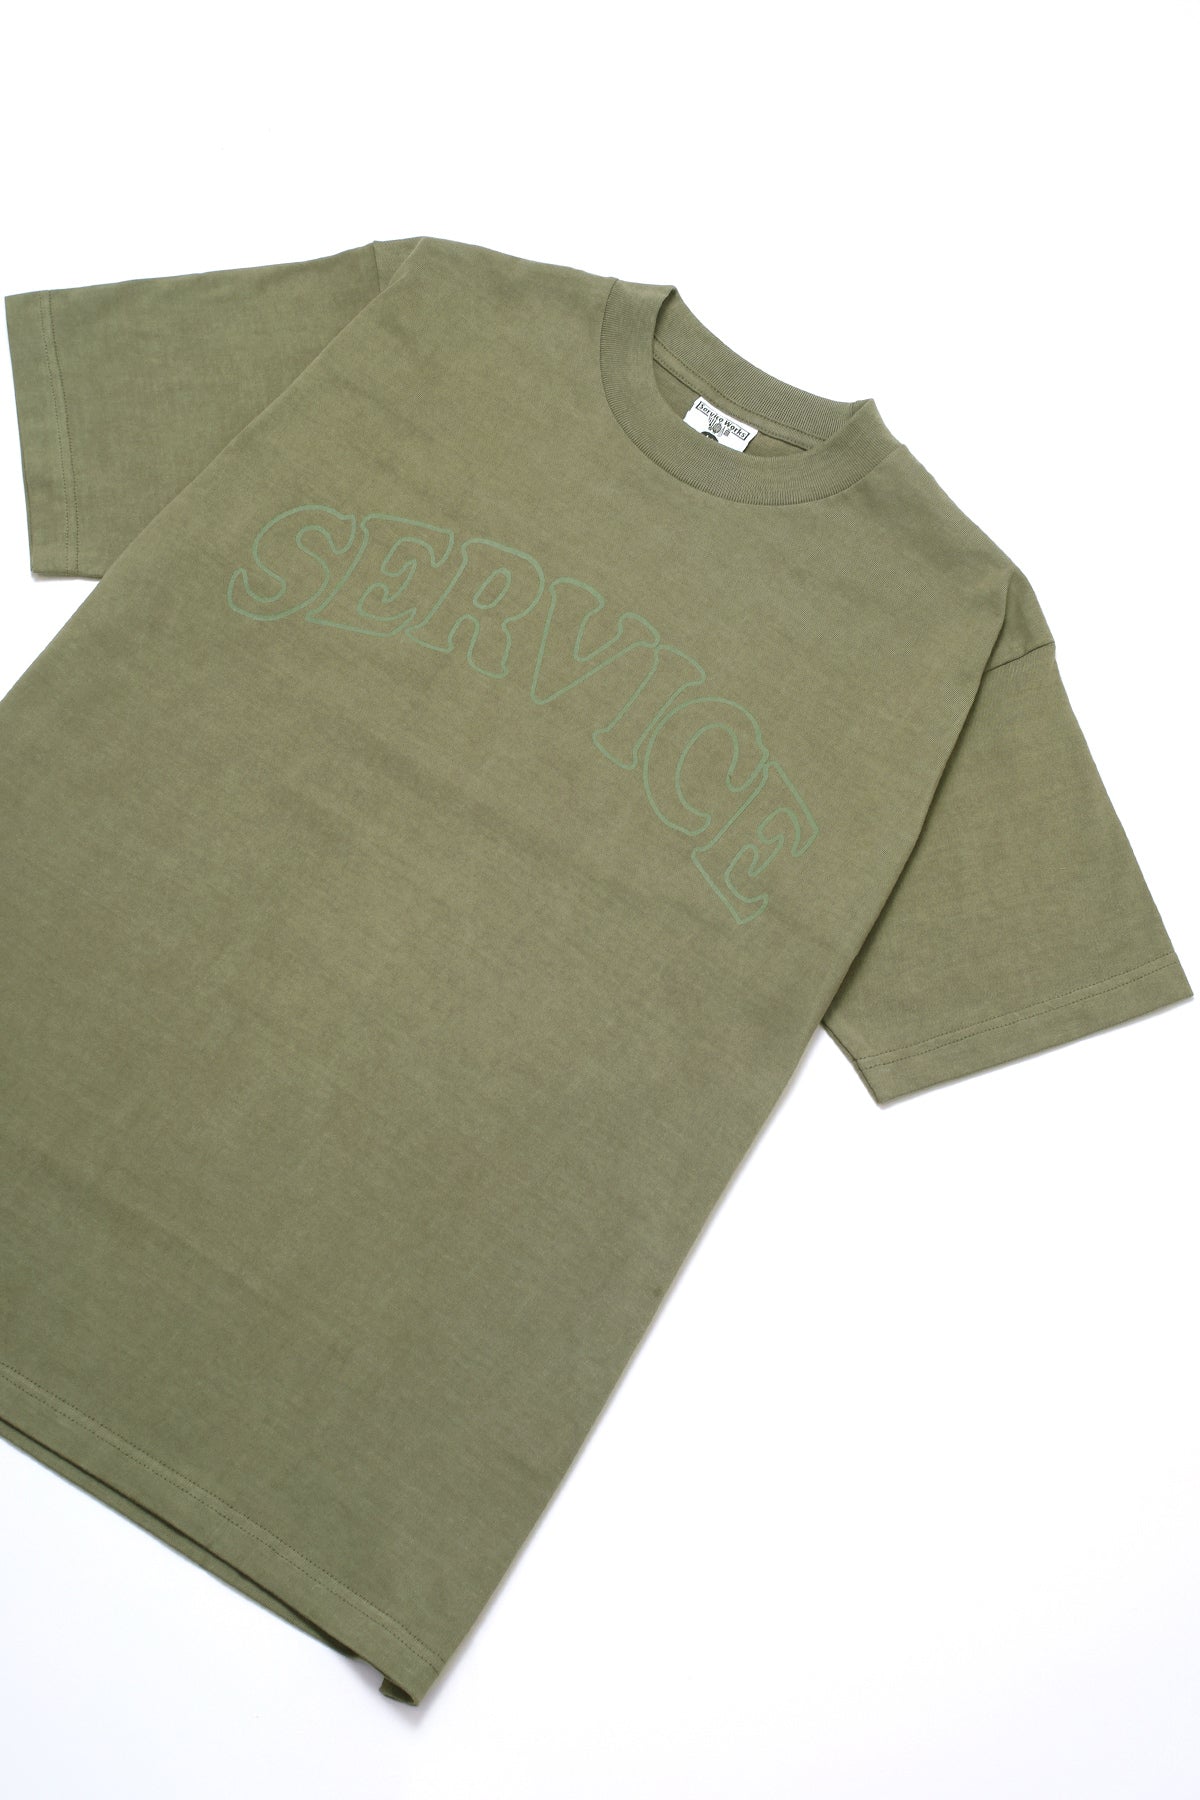 Service Works. Arch Logo Tee - Olive